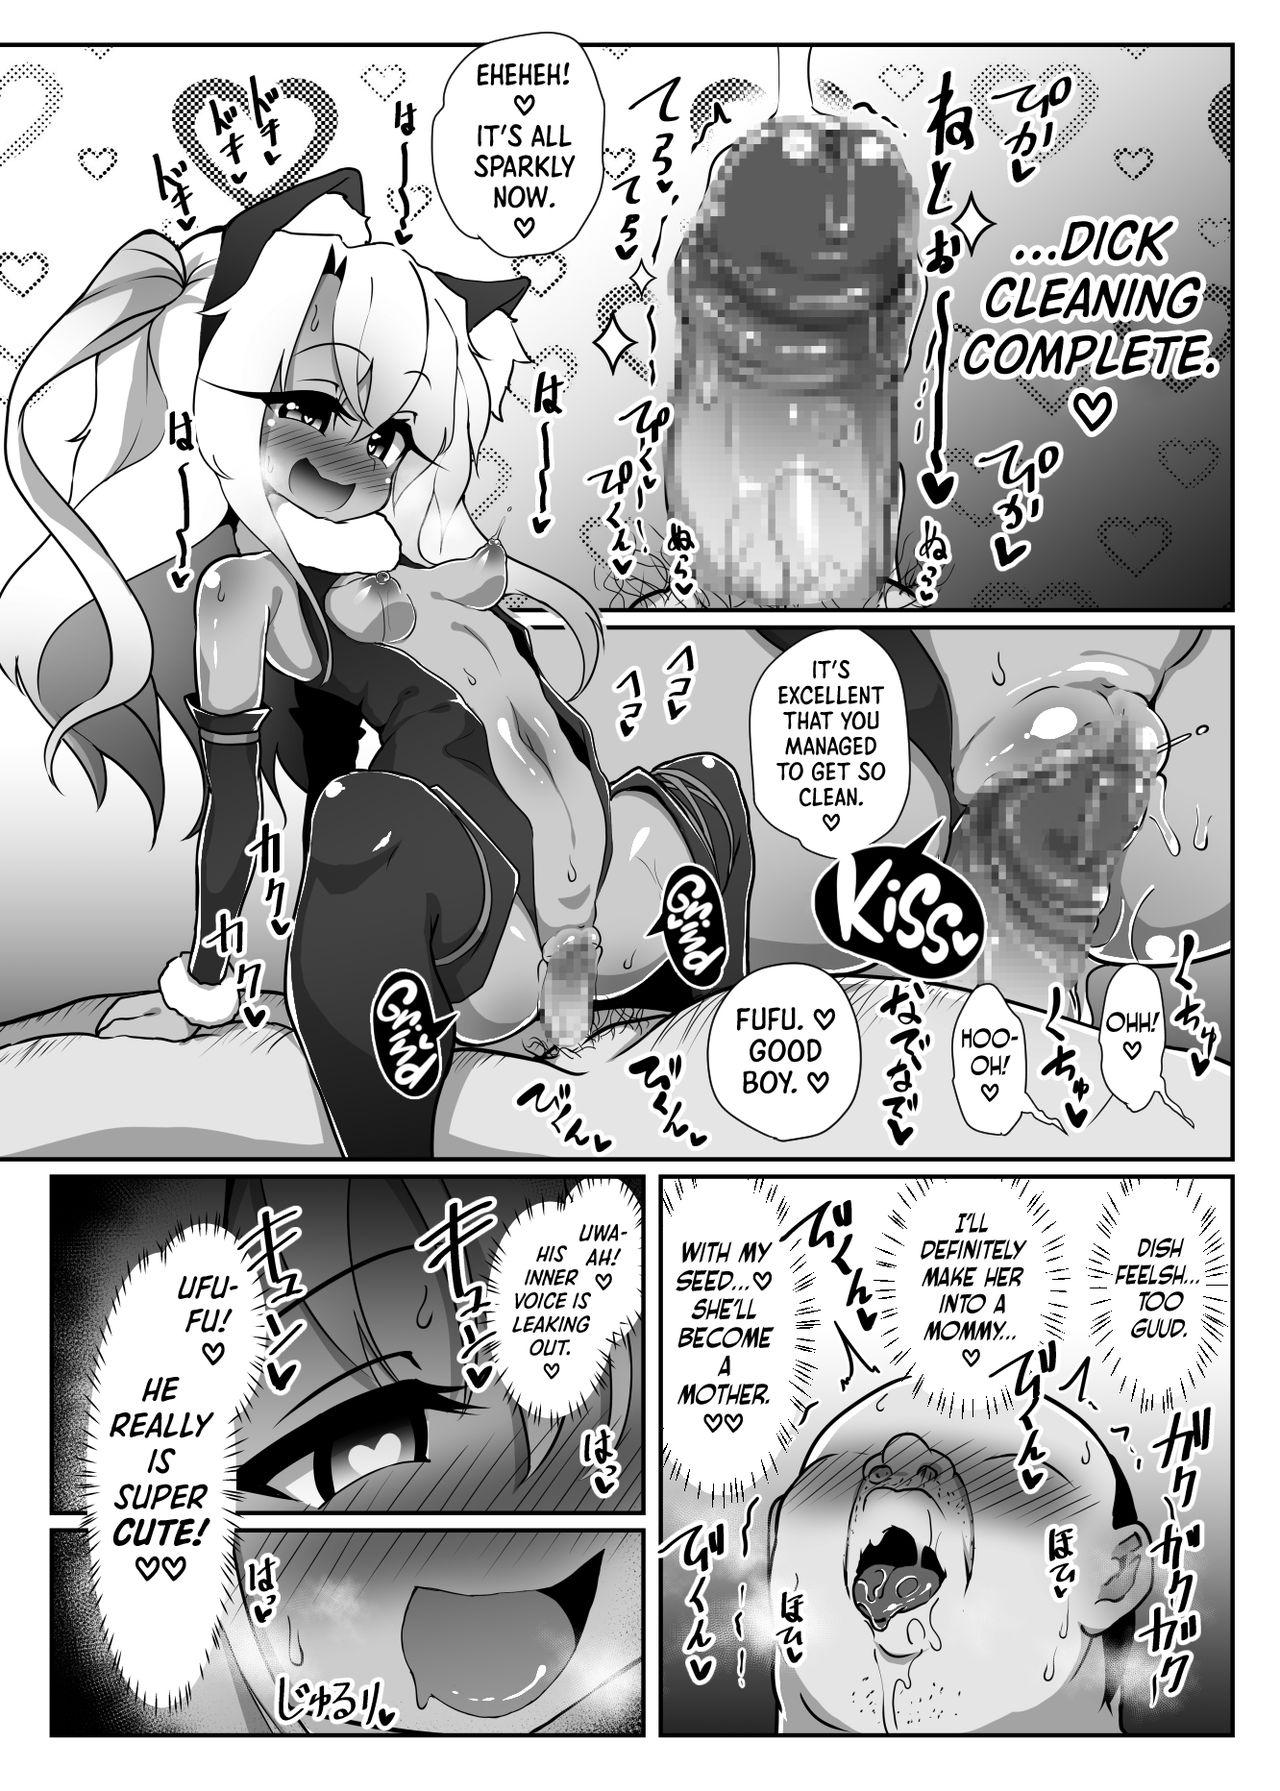 [Kotee] A book where Chloe-chan pretends to be hypnotized and relentlessly gives birth over and over to a disgusting old micro-dicked virgin’s babies. (Fate/kaleid liner Prisma Illya) [English] [Secluded] [Digital] 20